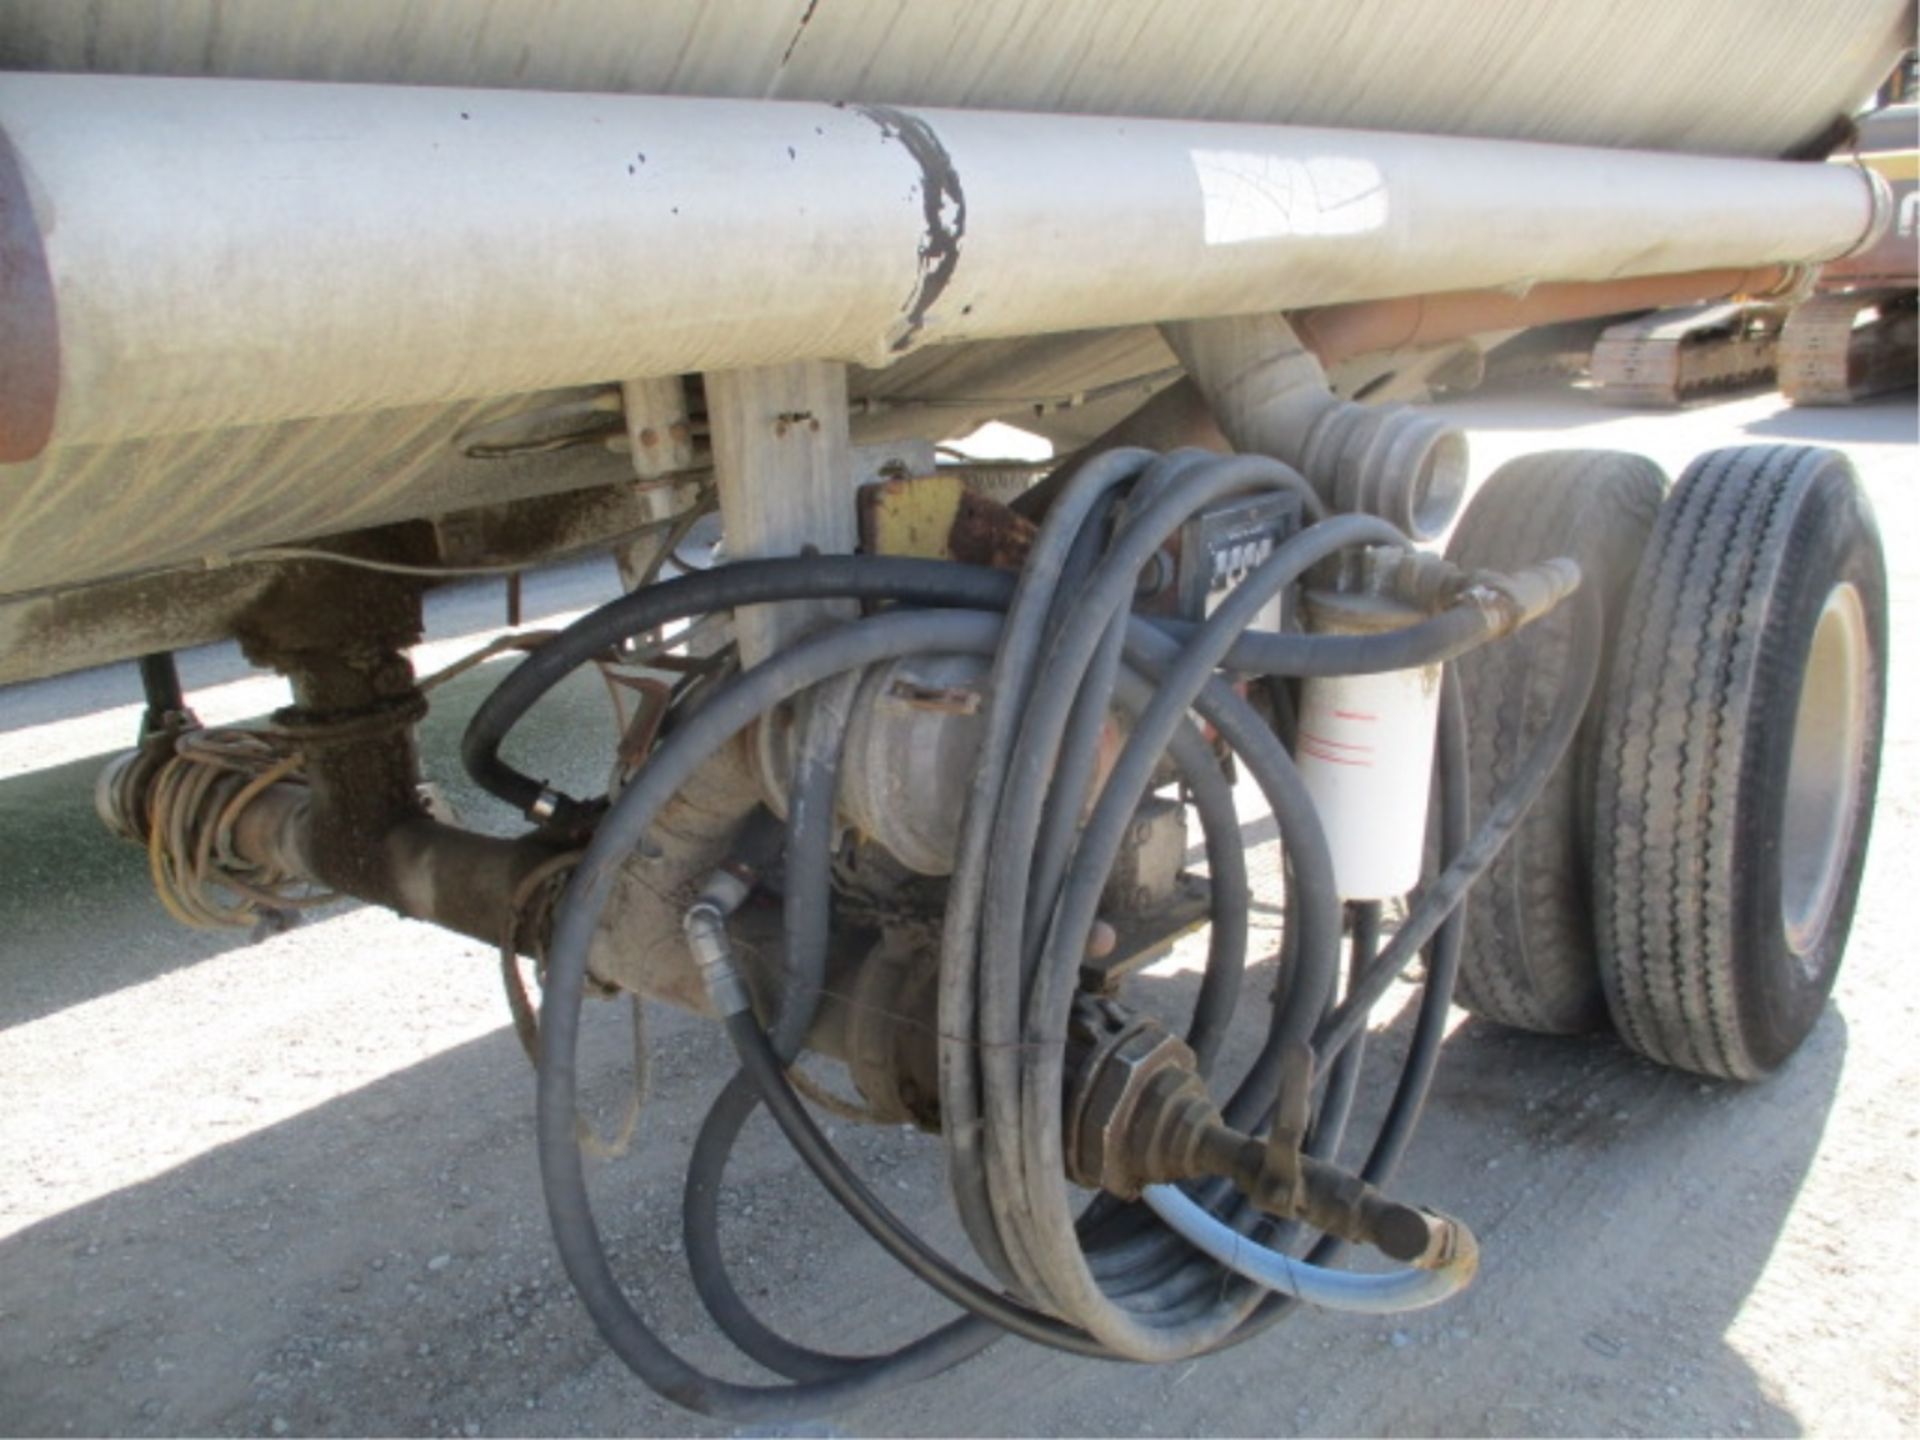 Utility T/A Aluminum Fuel Trailer, 5,000 Gallon Tank, Fuel Pump & Hose, Fixed Dolly, Pintle - Image 7 of 12